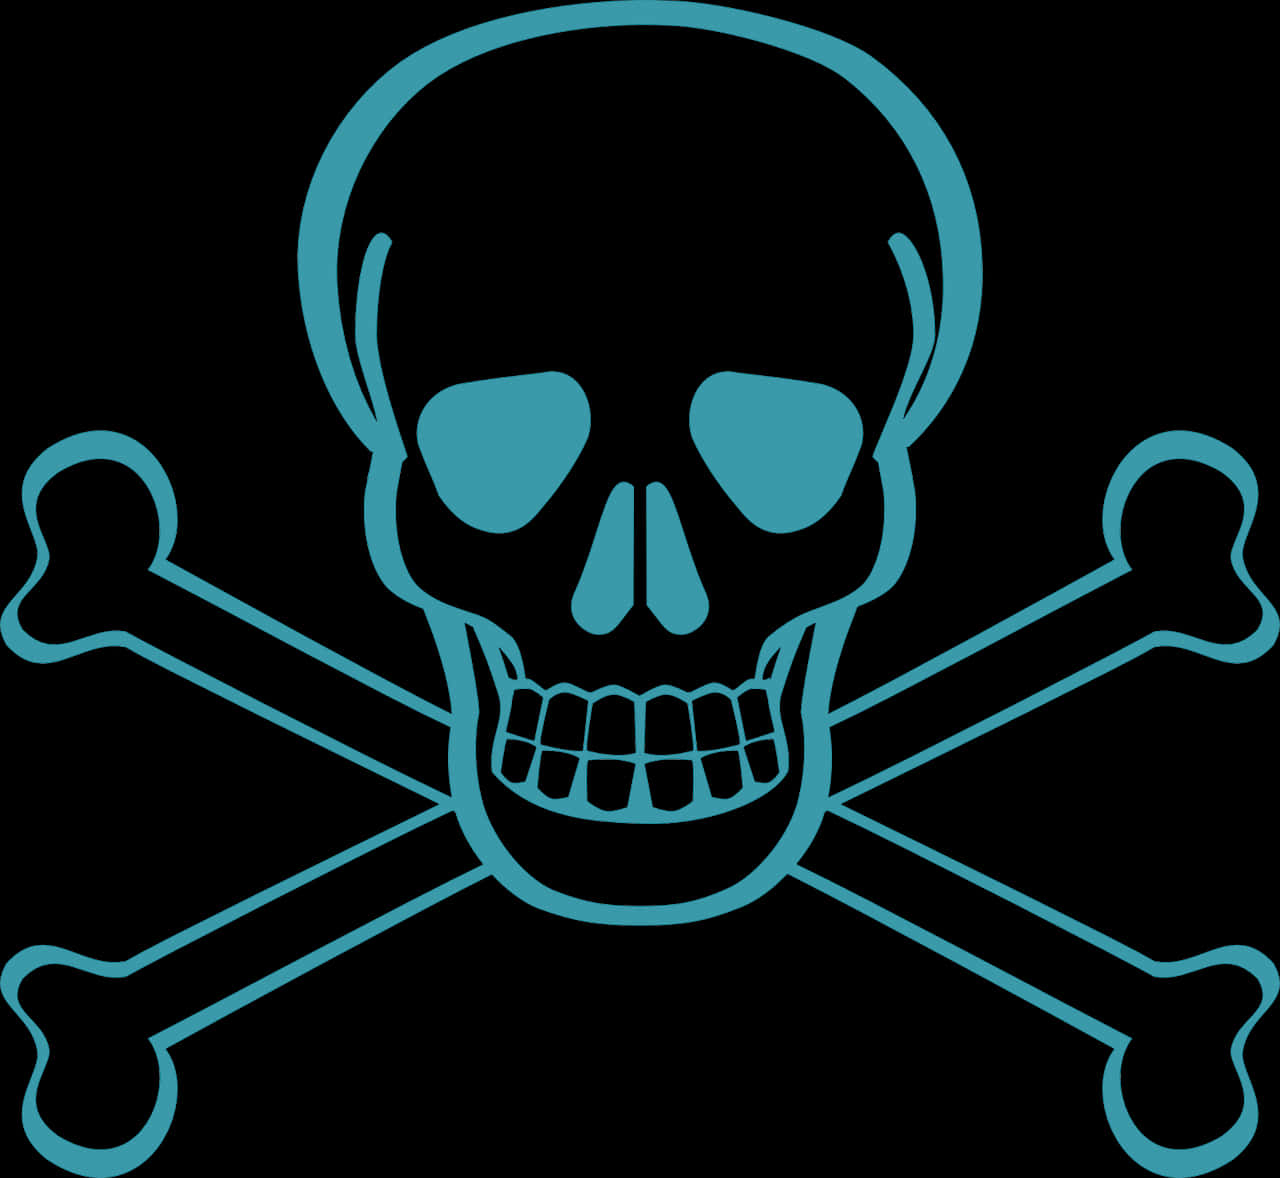 A Skull And Crossbones On A Black Background